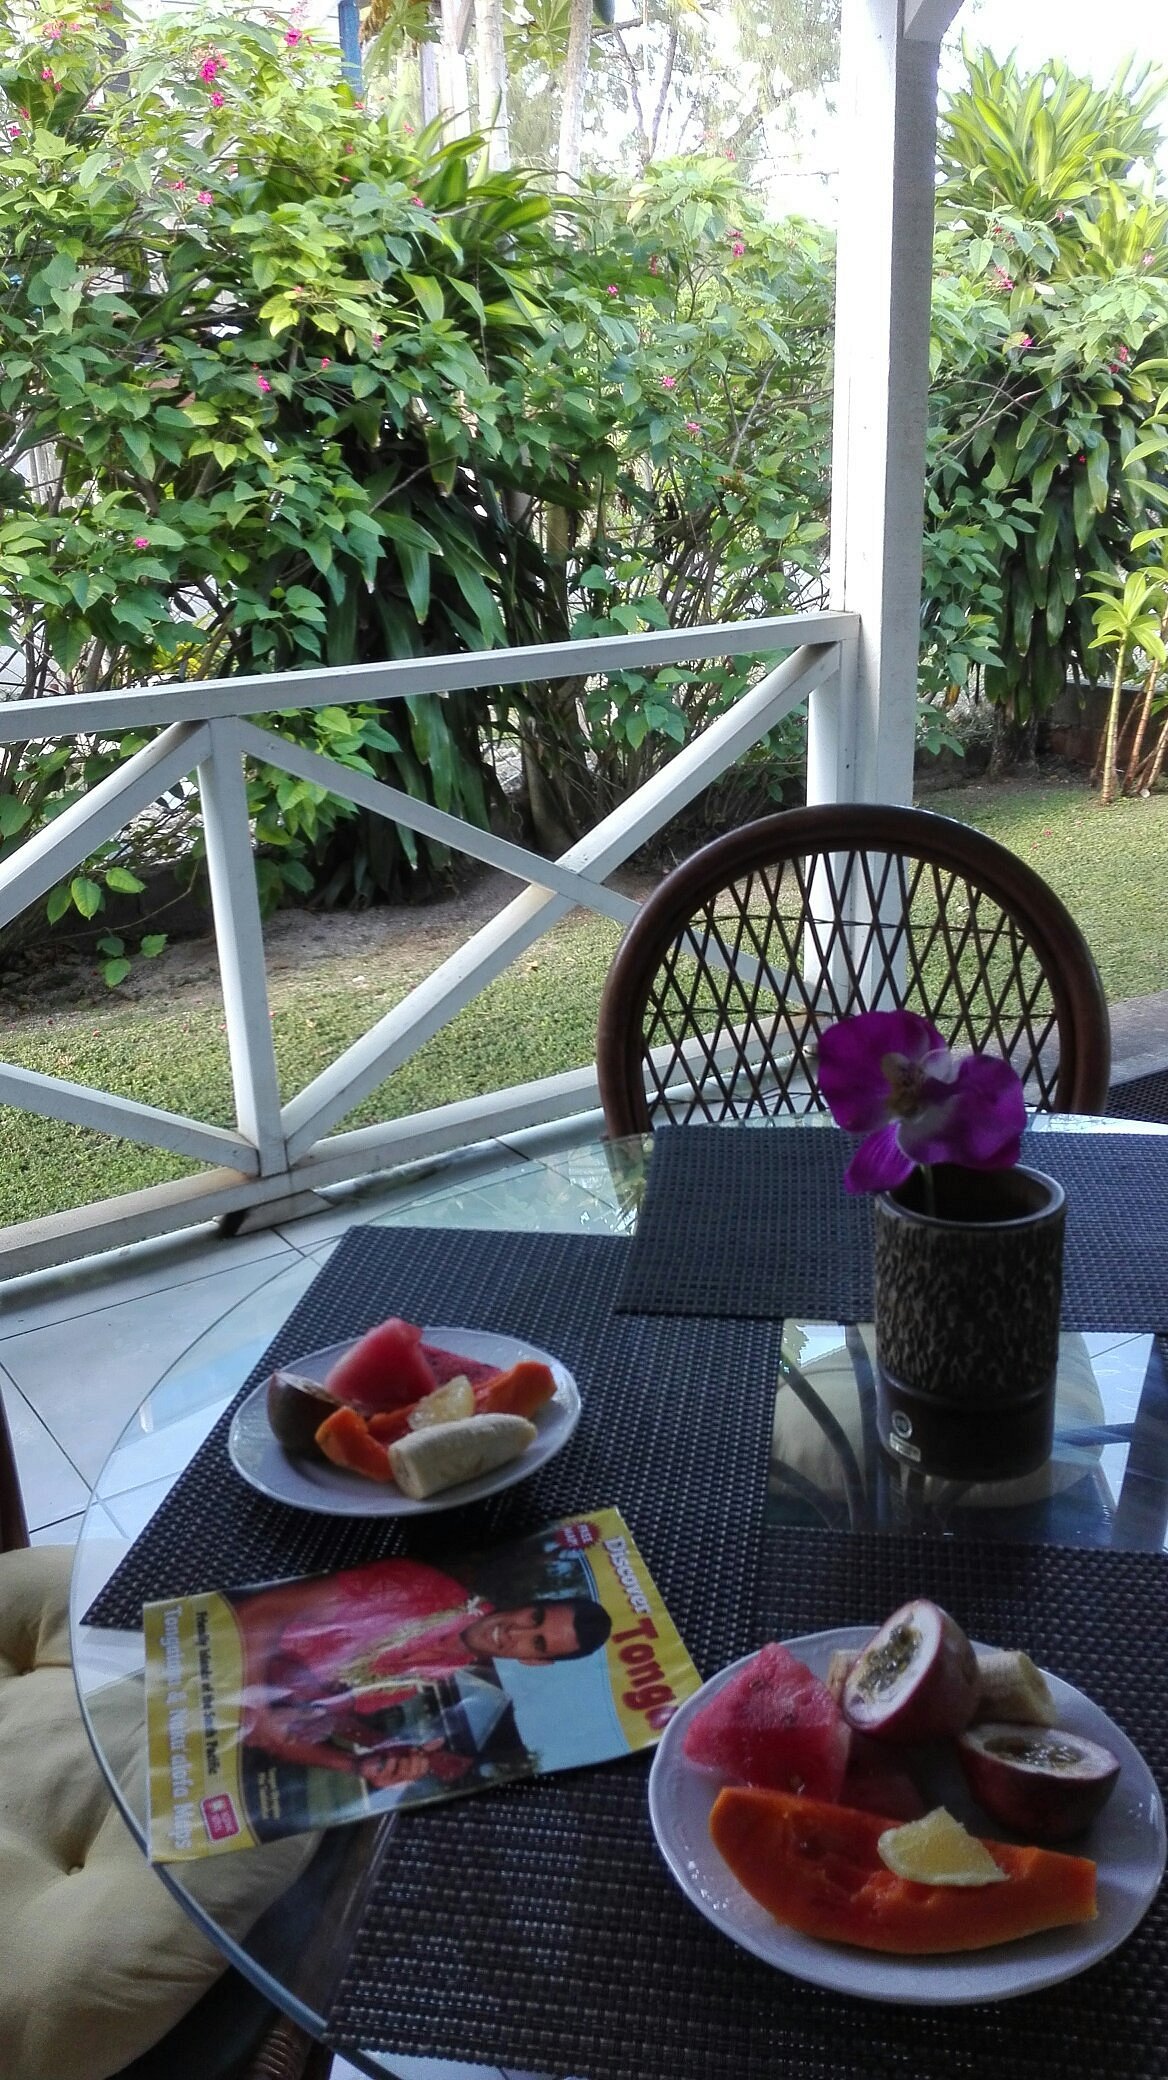 Saoirses Retreats UPDATED 2023: 2 Bedroom Guest house in Nuku'alofa with  Air Conditioning and Washer - Tripadvisor